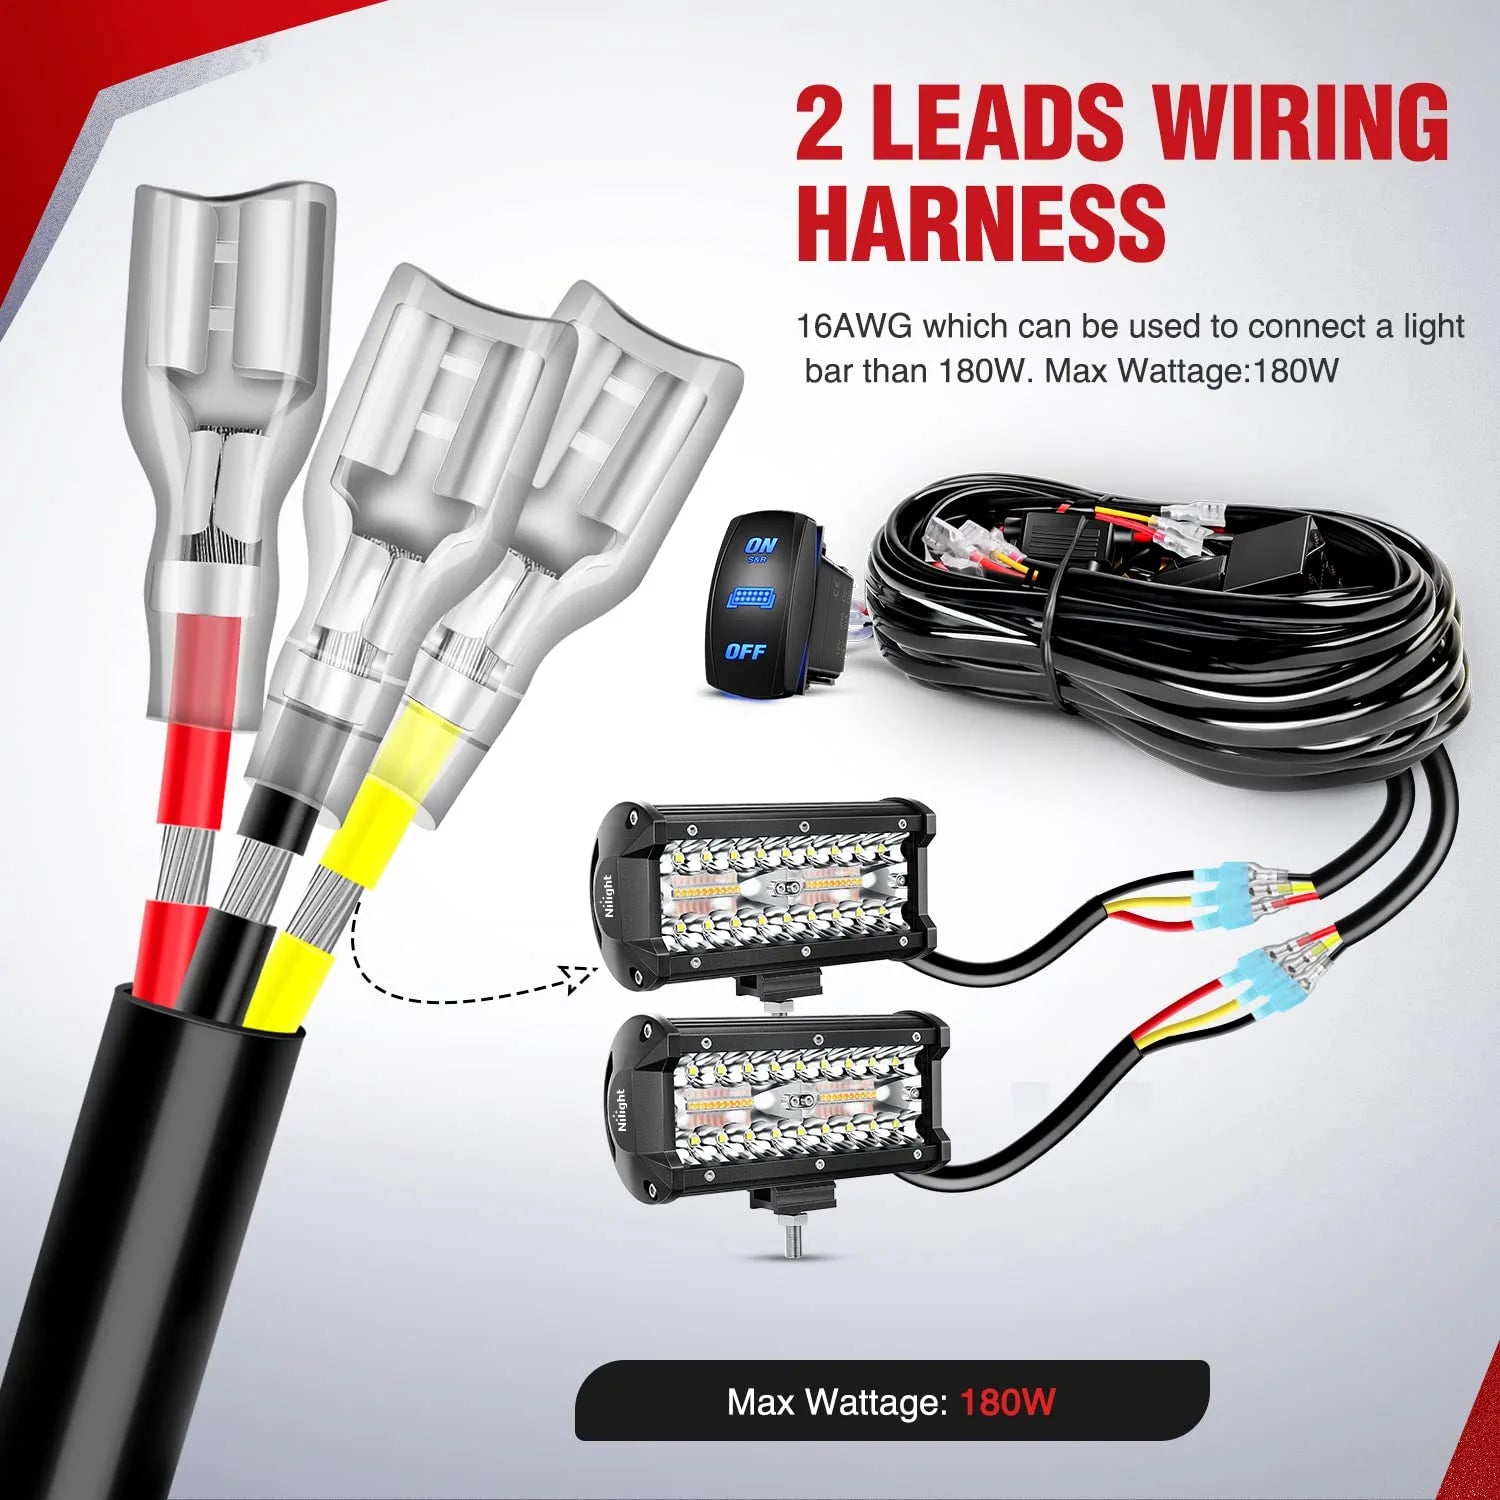 16AWG Amber White Light Bar Wire Harness Kit 2 Leads W/ 12V 8Pin Switch | 2 Fuses | 6 Spade Connectors Nilight